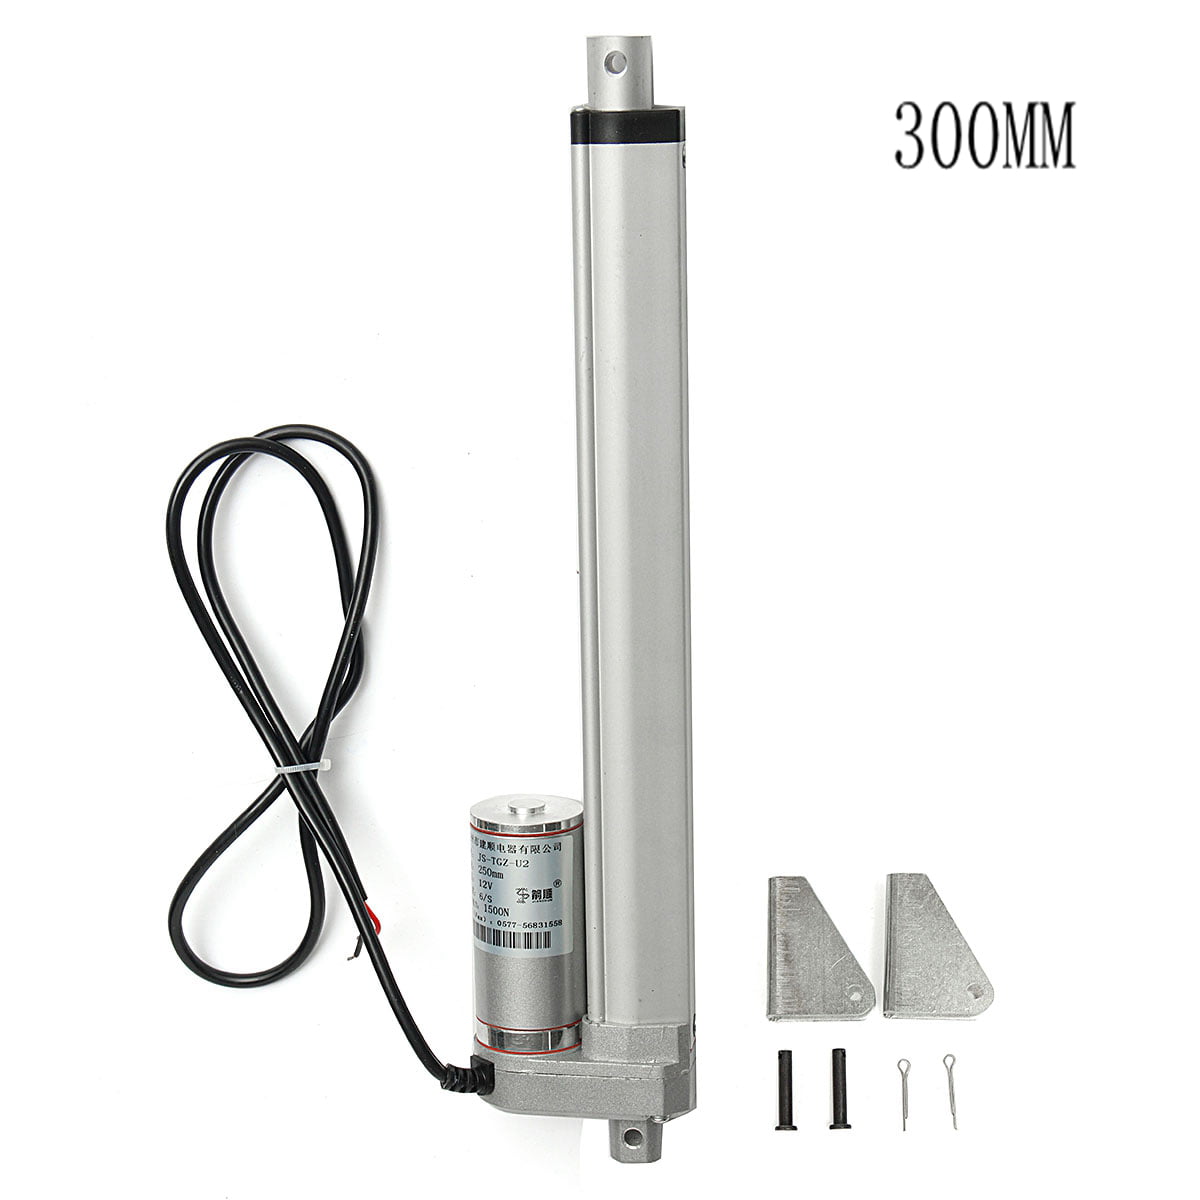 DC Electric Motor 12V Stroke 100mm Speed 10/16mm/s 750N/600N Linear Actuator 